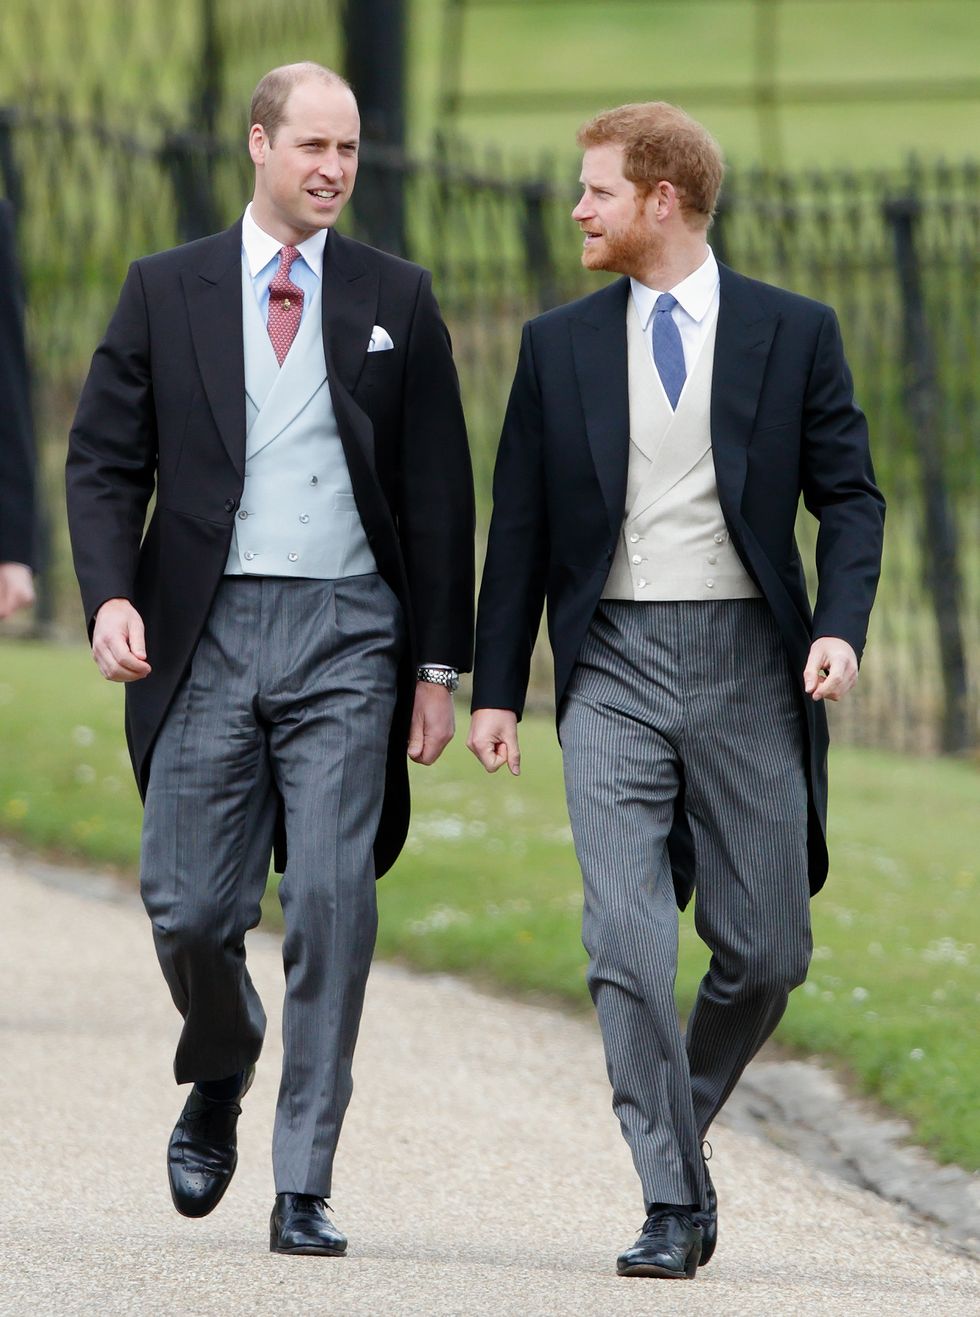 englefield green, united kingdom   may 20 embargoed for publication in uk newspapers until 48 hours after create date and time prince william, duke of cambridge and prince harry attend the wedding of pippa middleton and james matthews at st marks church on may 20, 2017 in englefield green, england photo by max mumbyindigogetty images